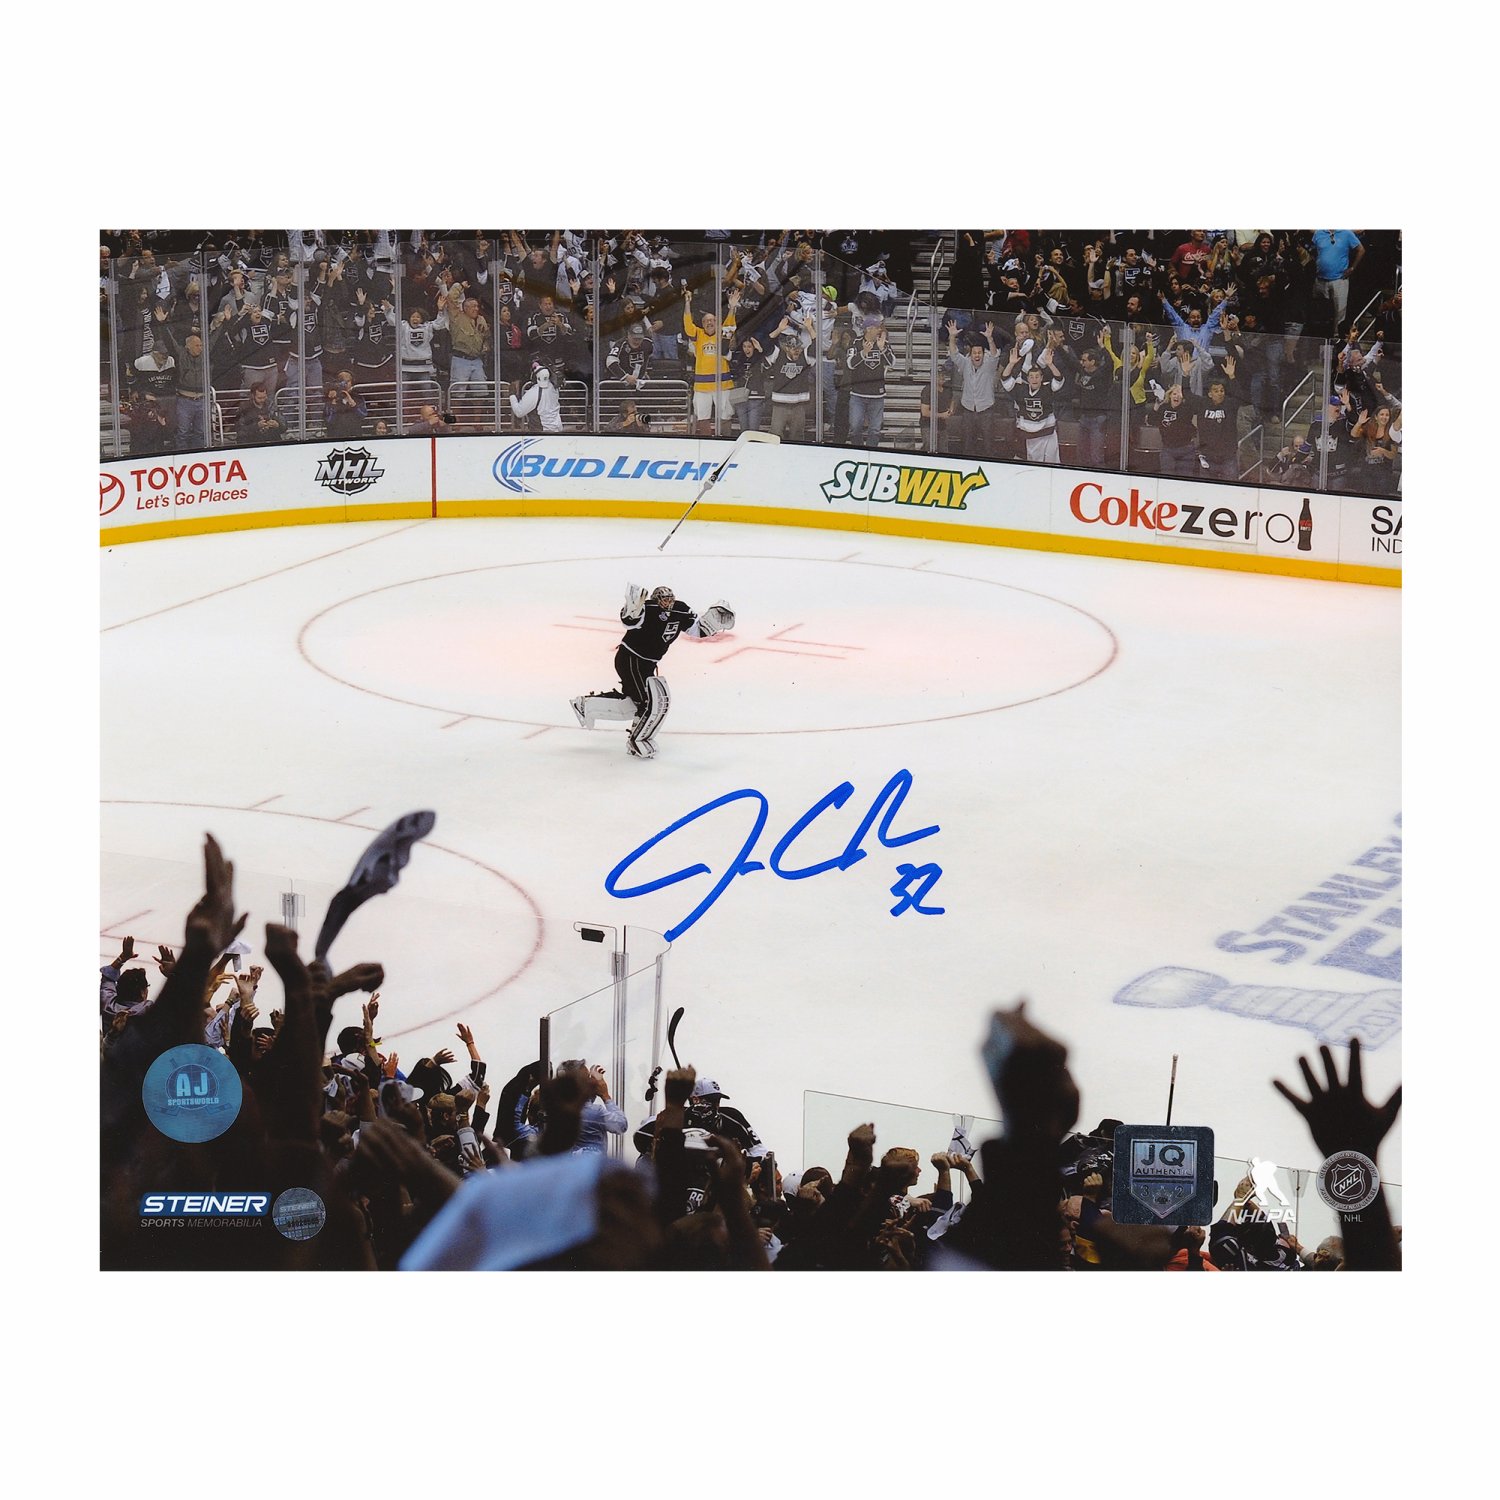 Jonathan Quick Signed 2014 Los Angeles Kings Stanley Cup Jersey